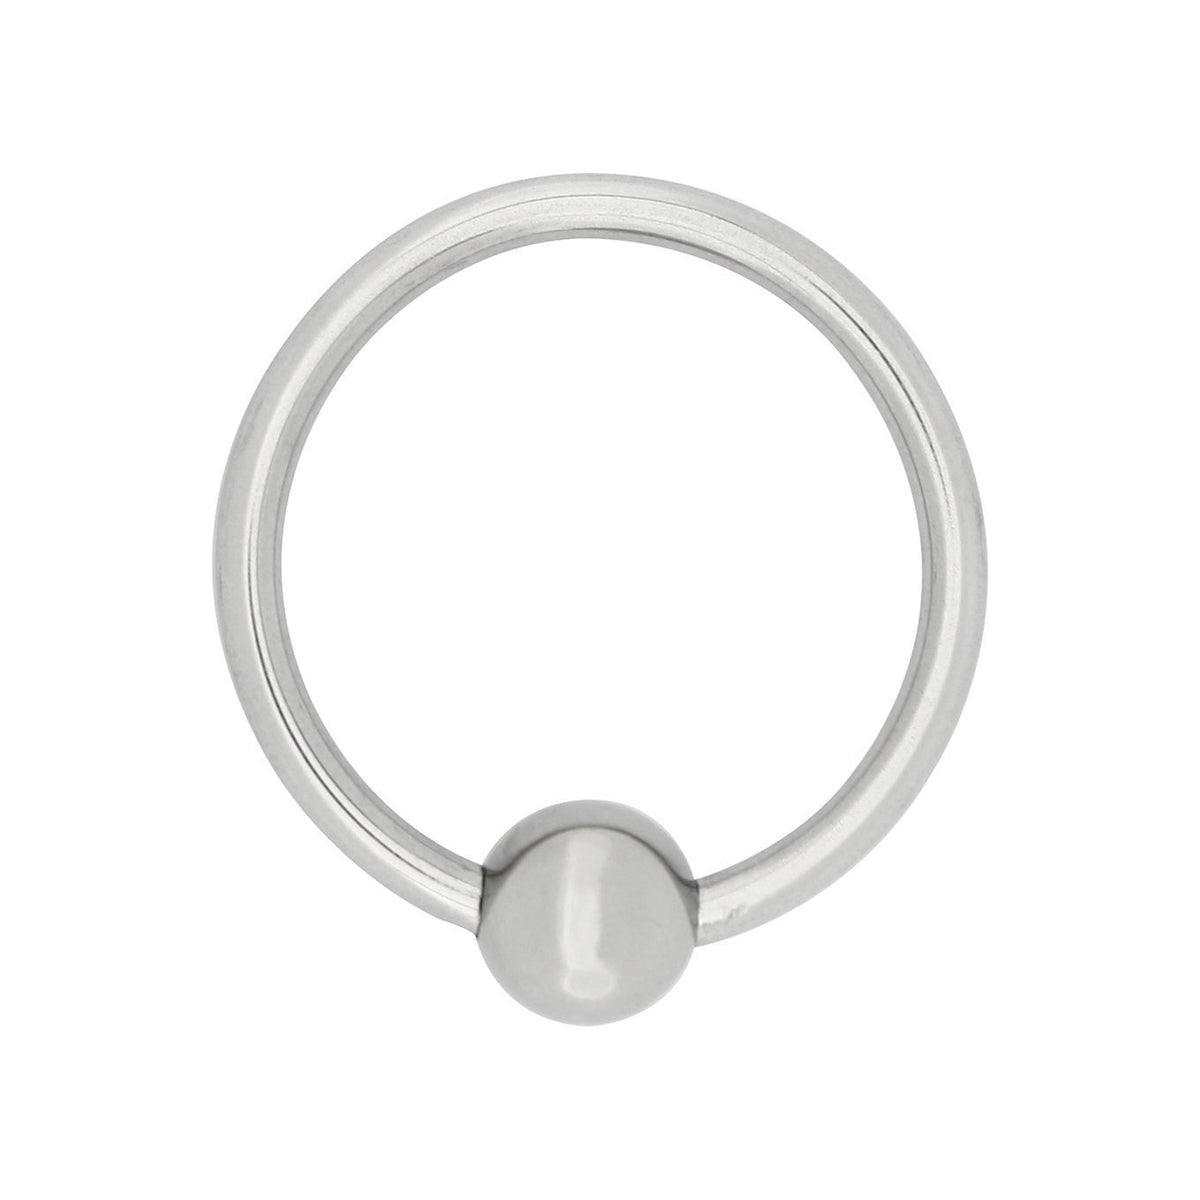 Steel Power Tools - Acorn Cock Ring 32mm Metal Cock Ring (Non Vibration) Singapore